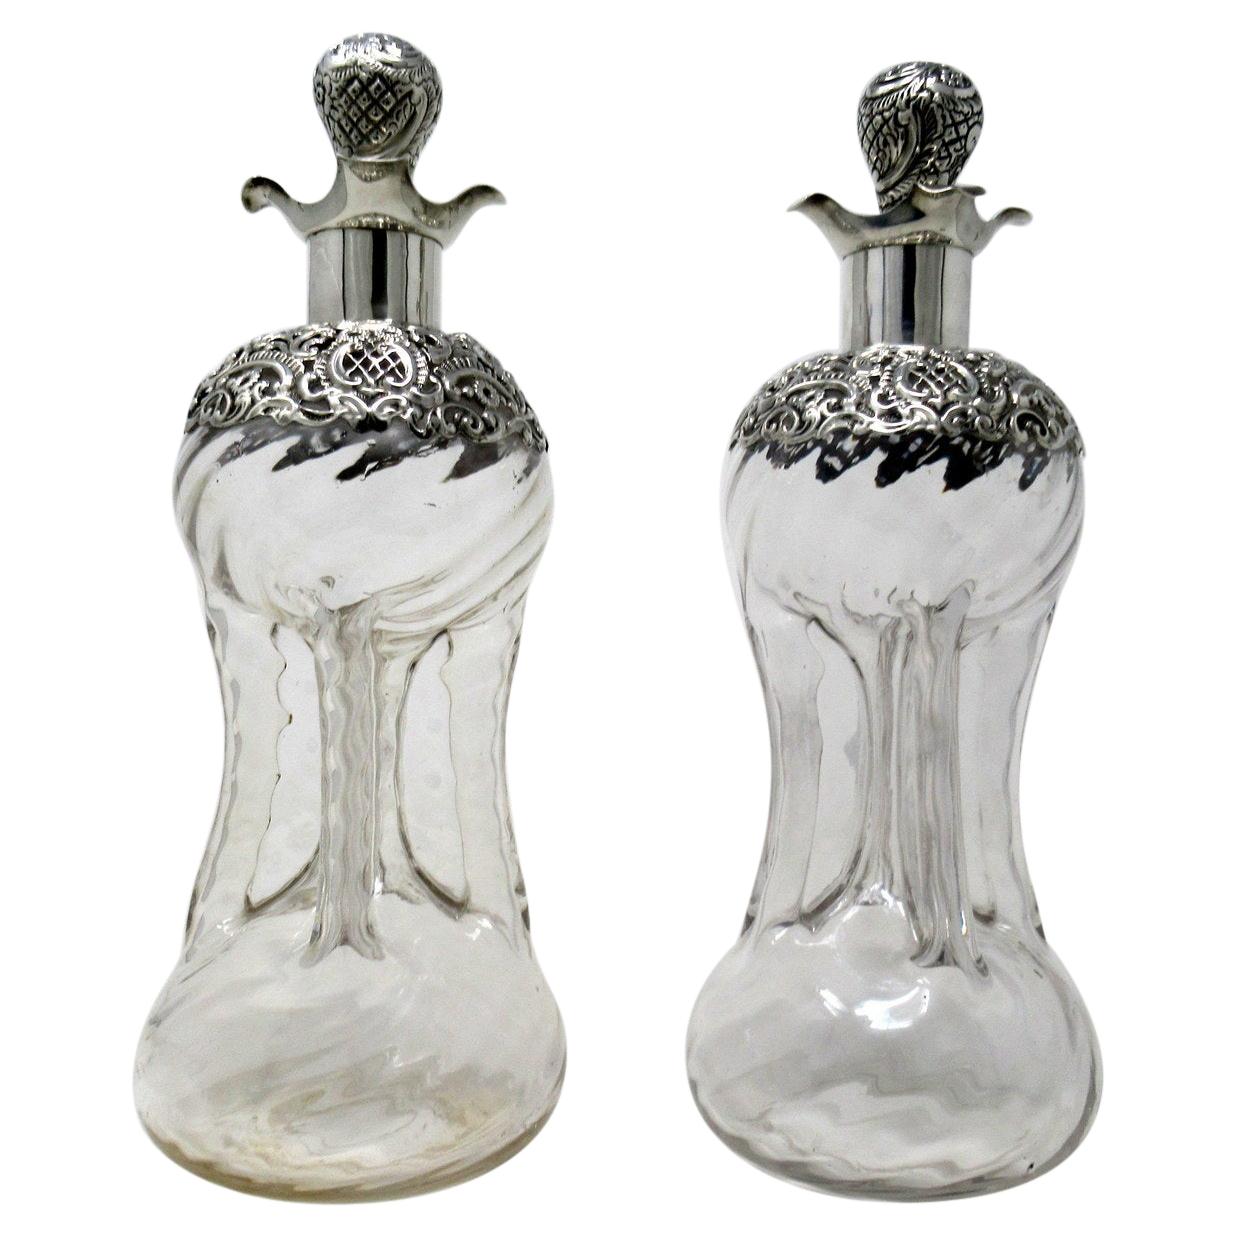 Pair of Full Lead Crystal Hallmark Sterling Silver Spirits Wine Decanters, 1899